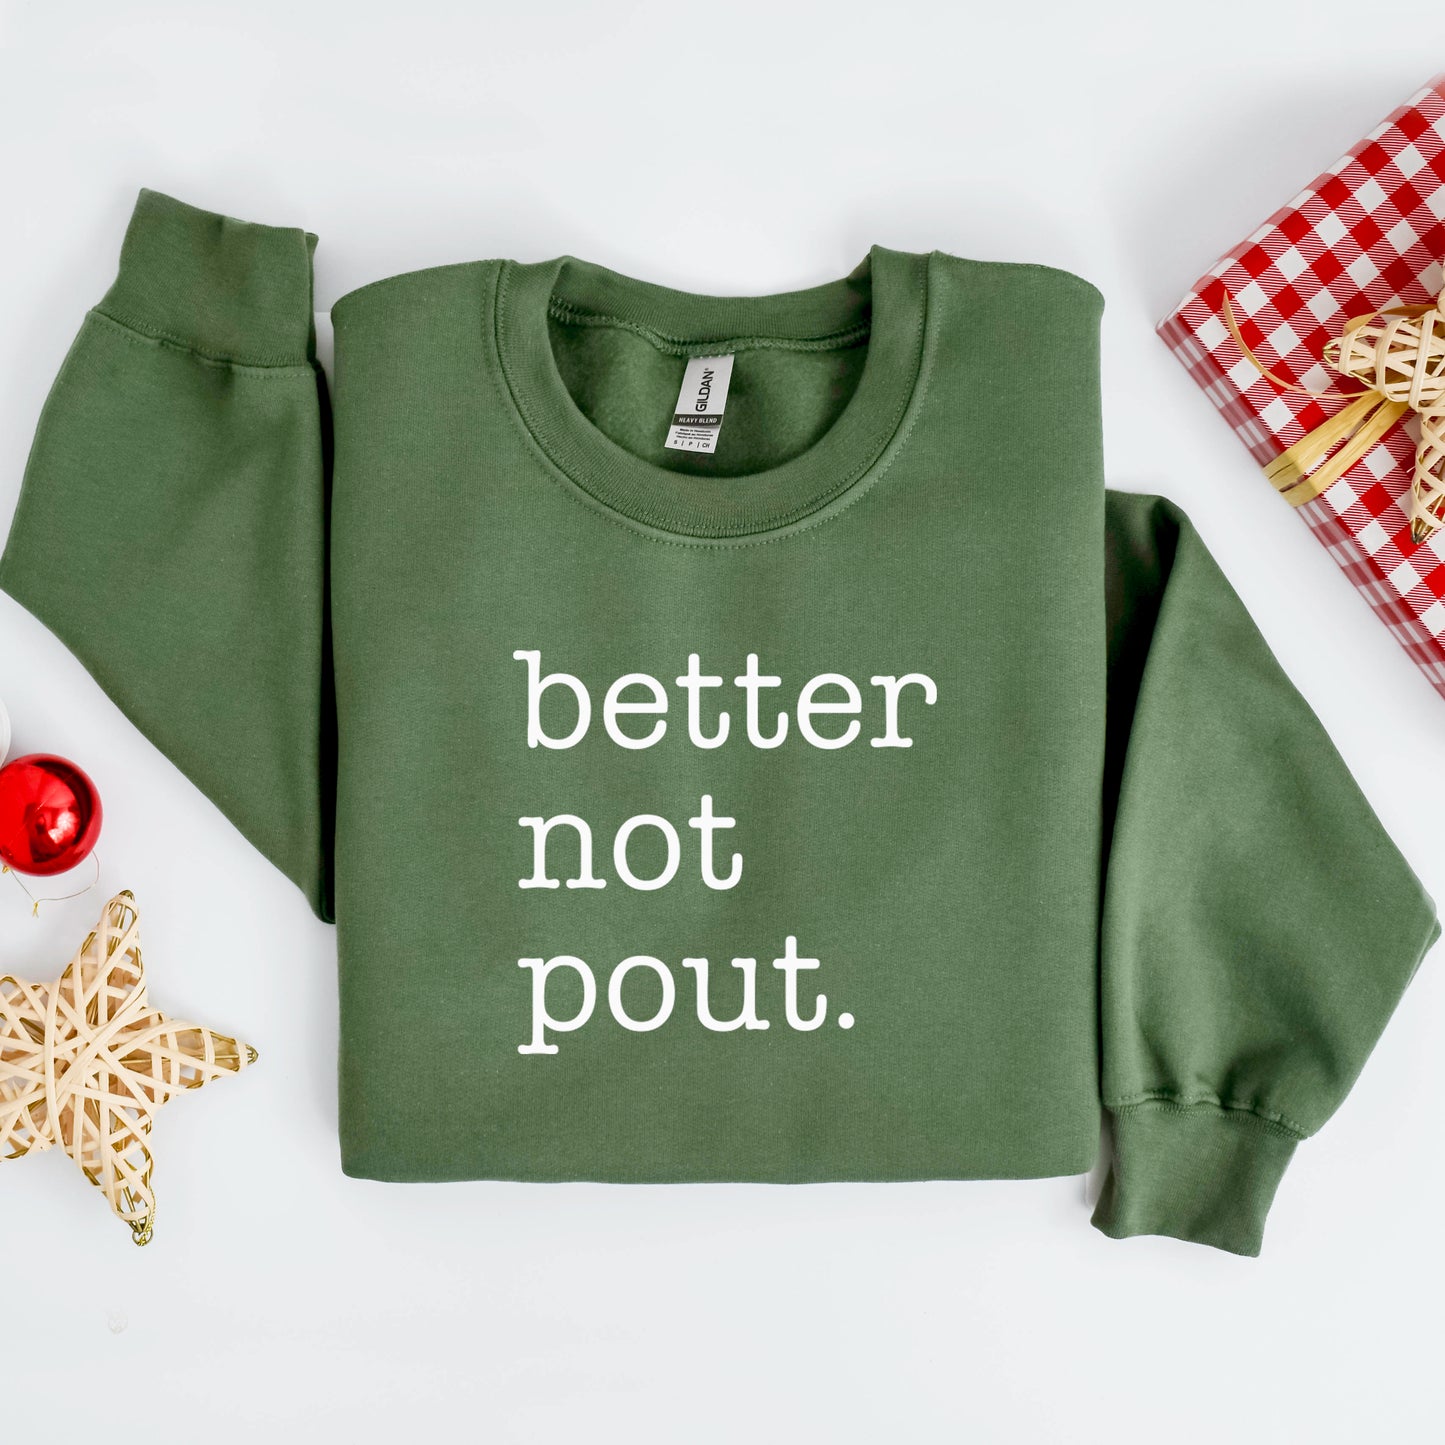 Better Not Pout. Sweatshirt- Military Green (Adult Only)